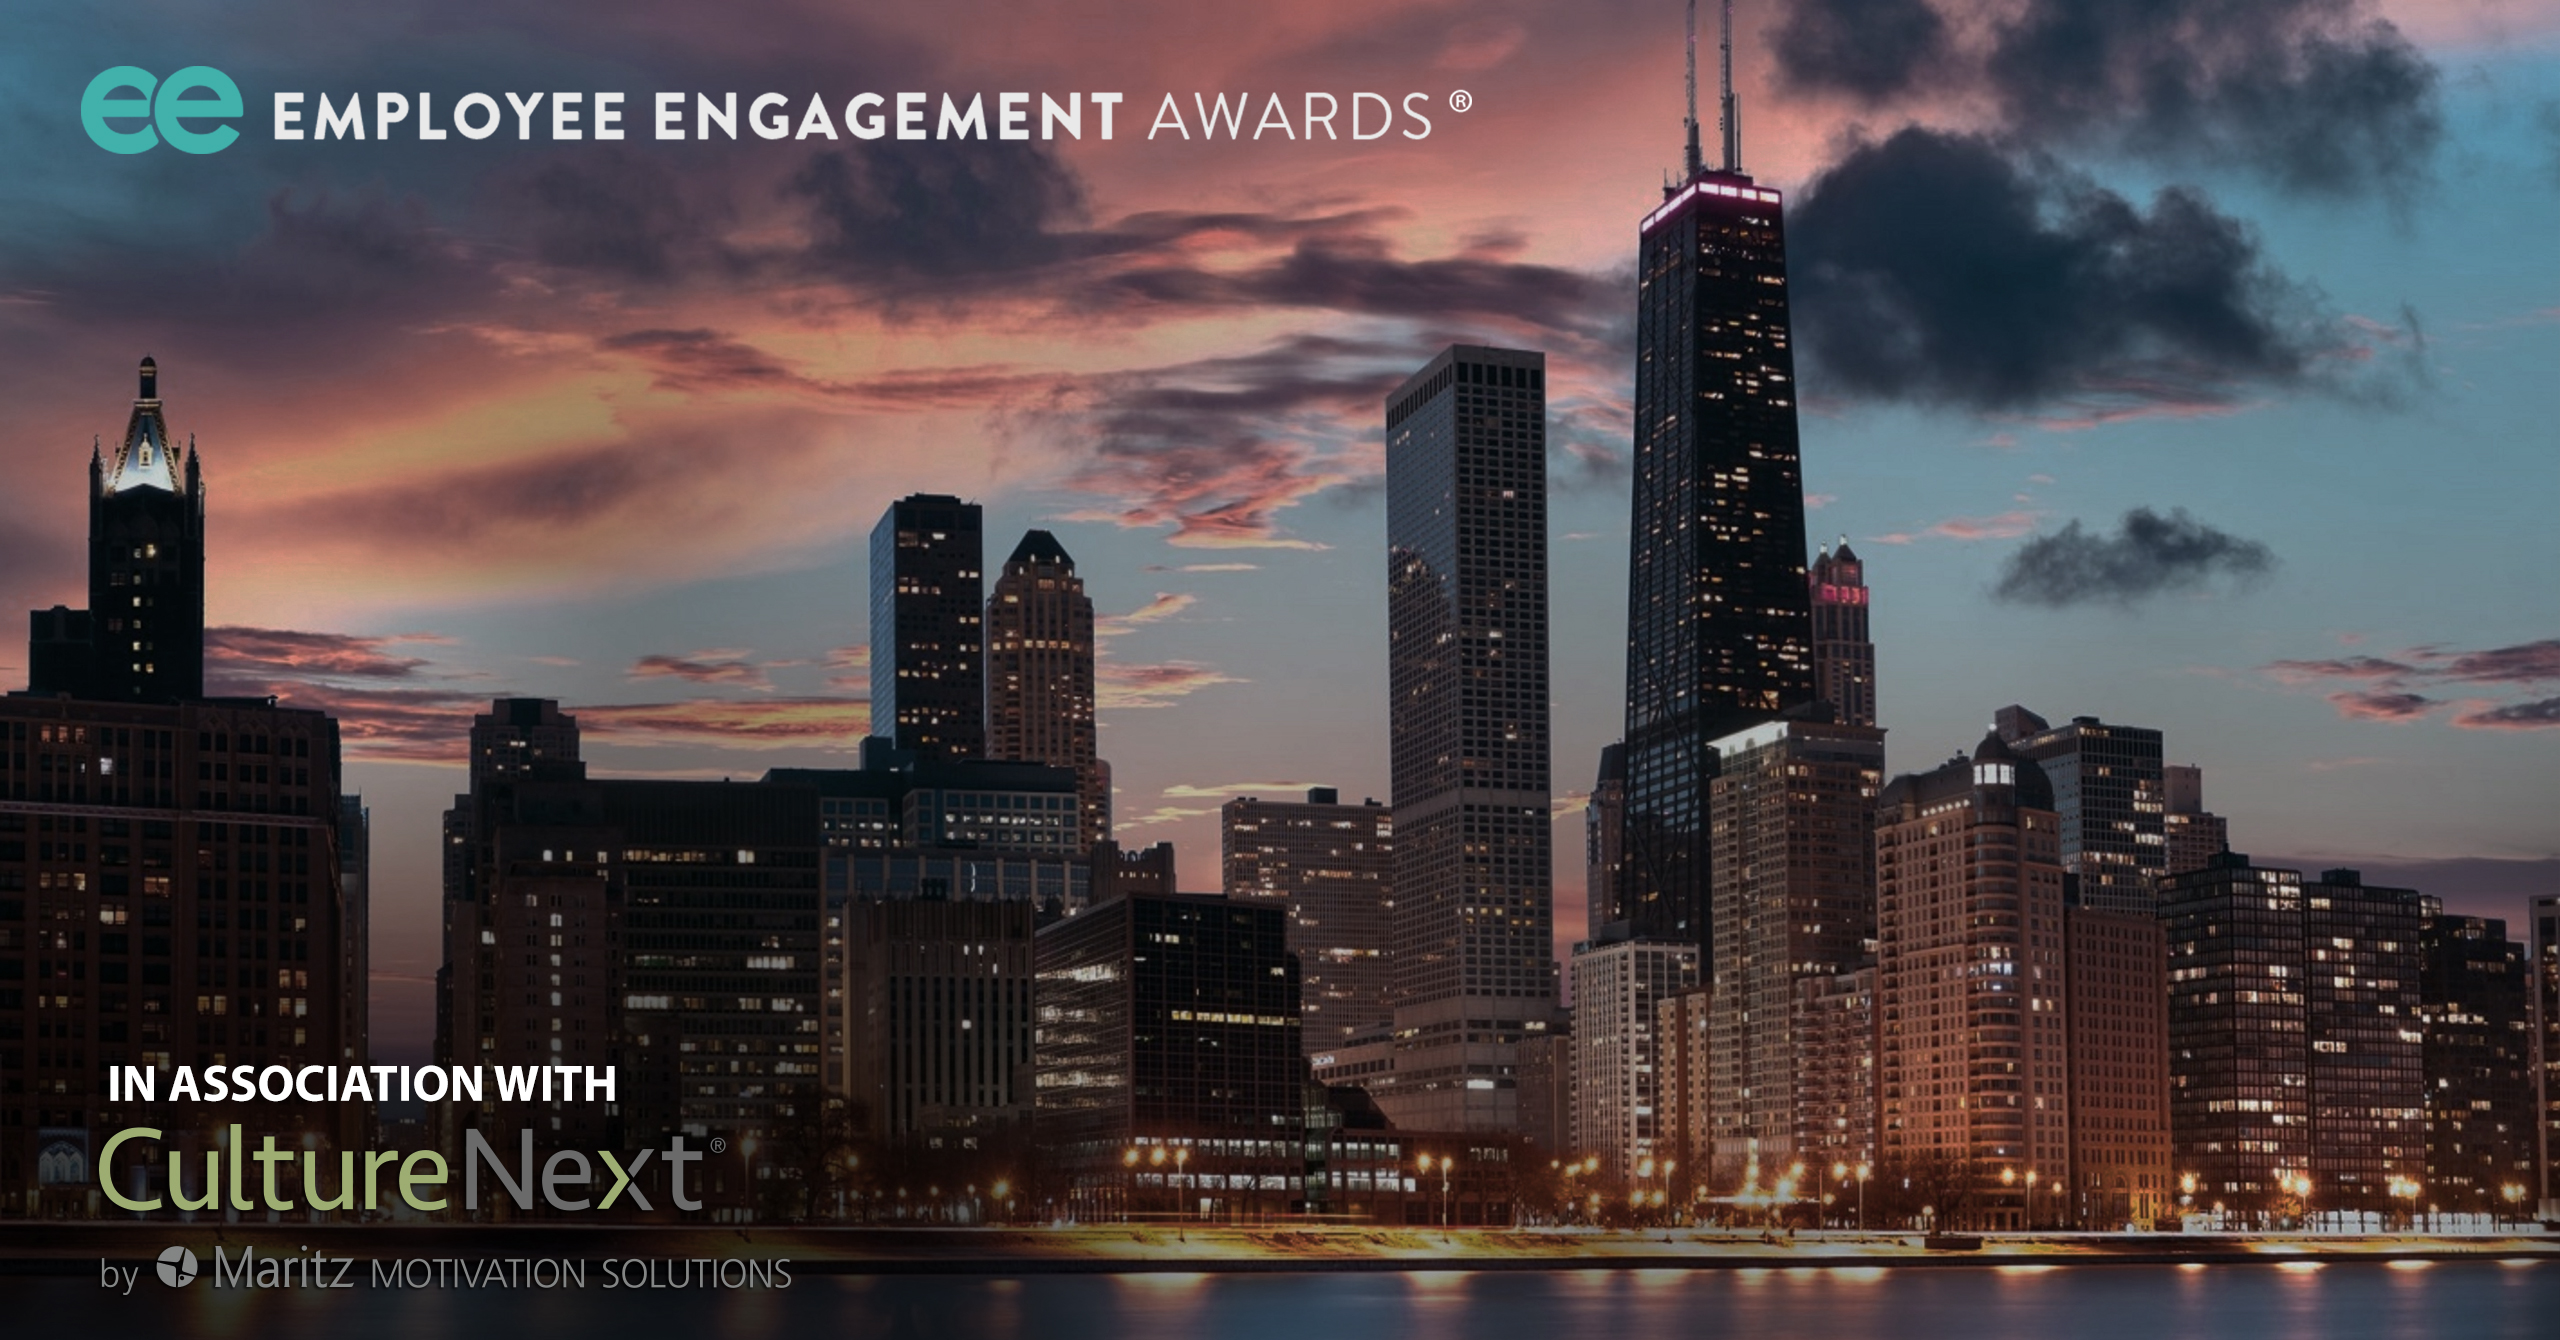 2017 North American Employee Engagement Awards in association with CultureNext now open for entries